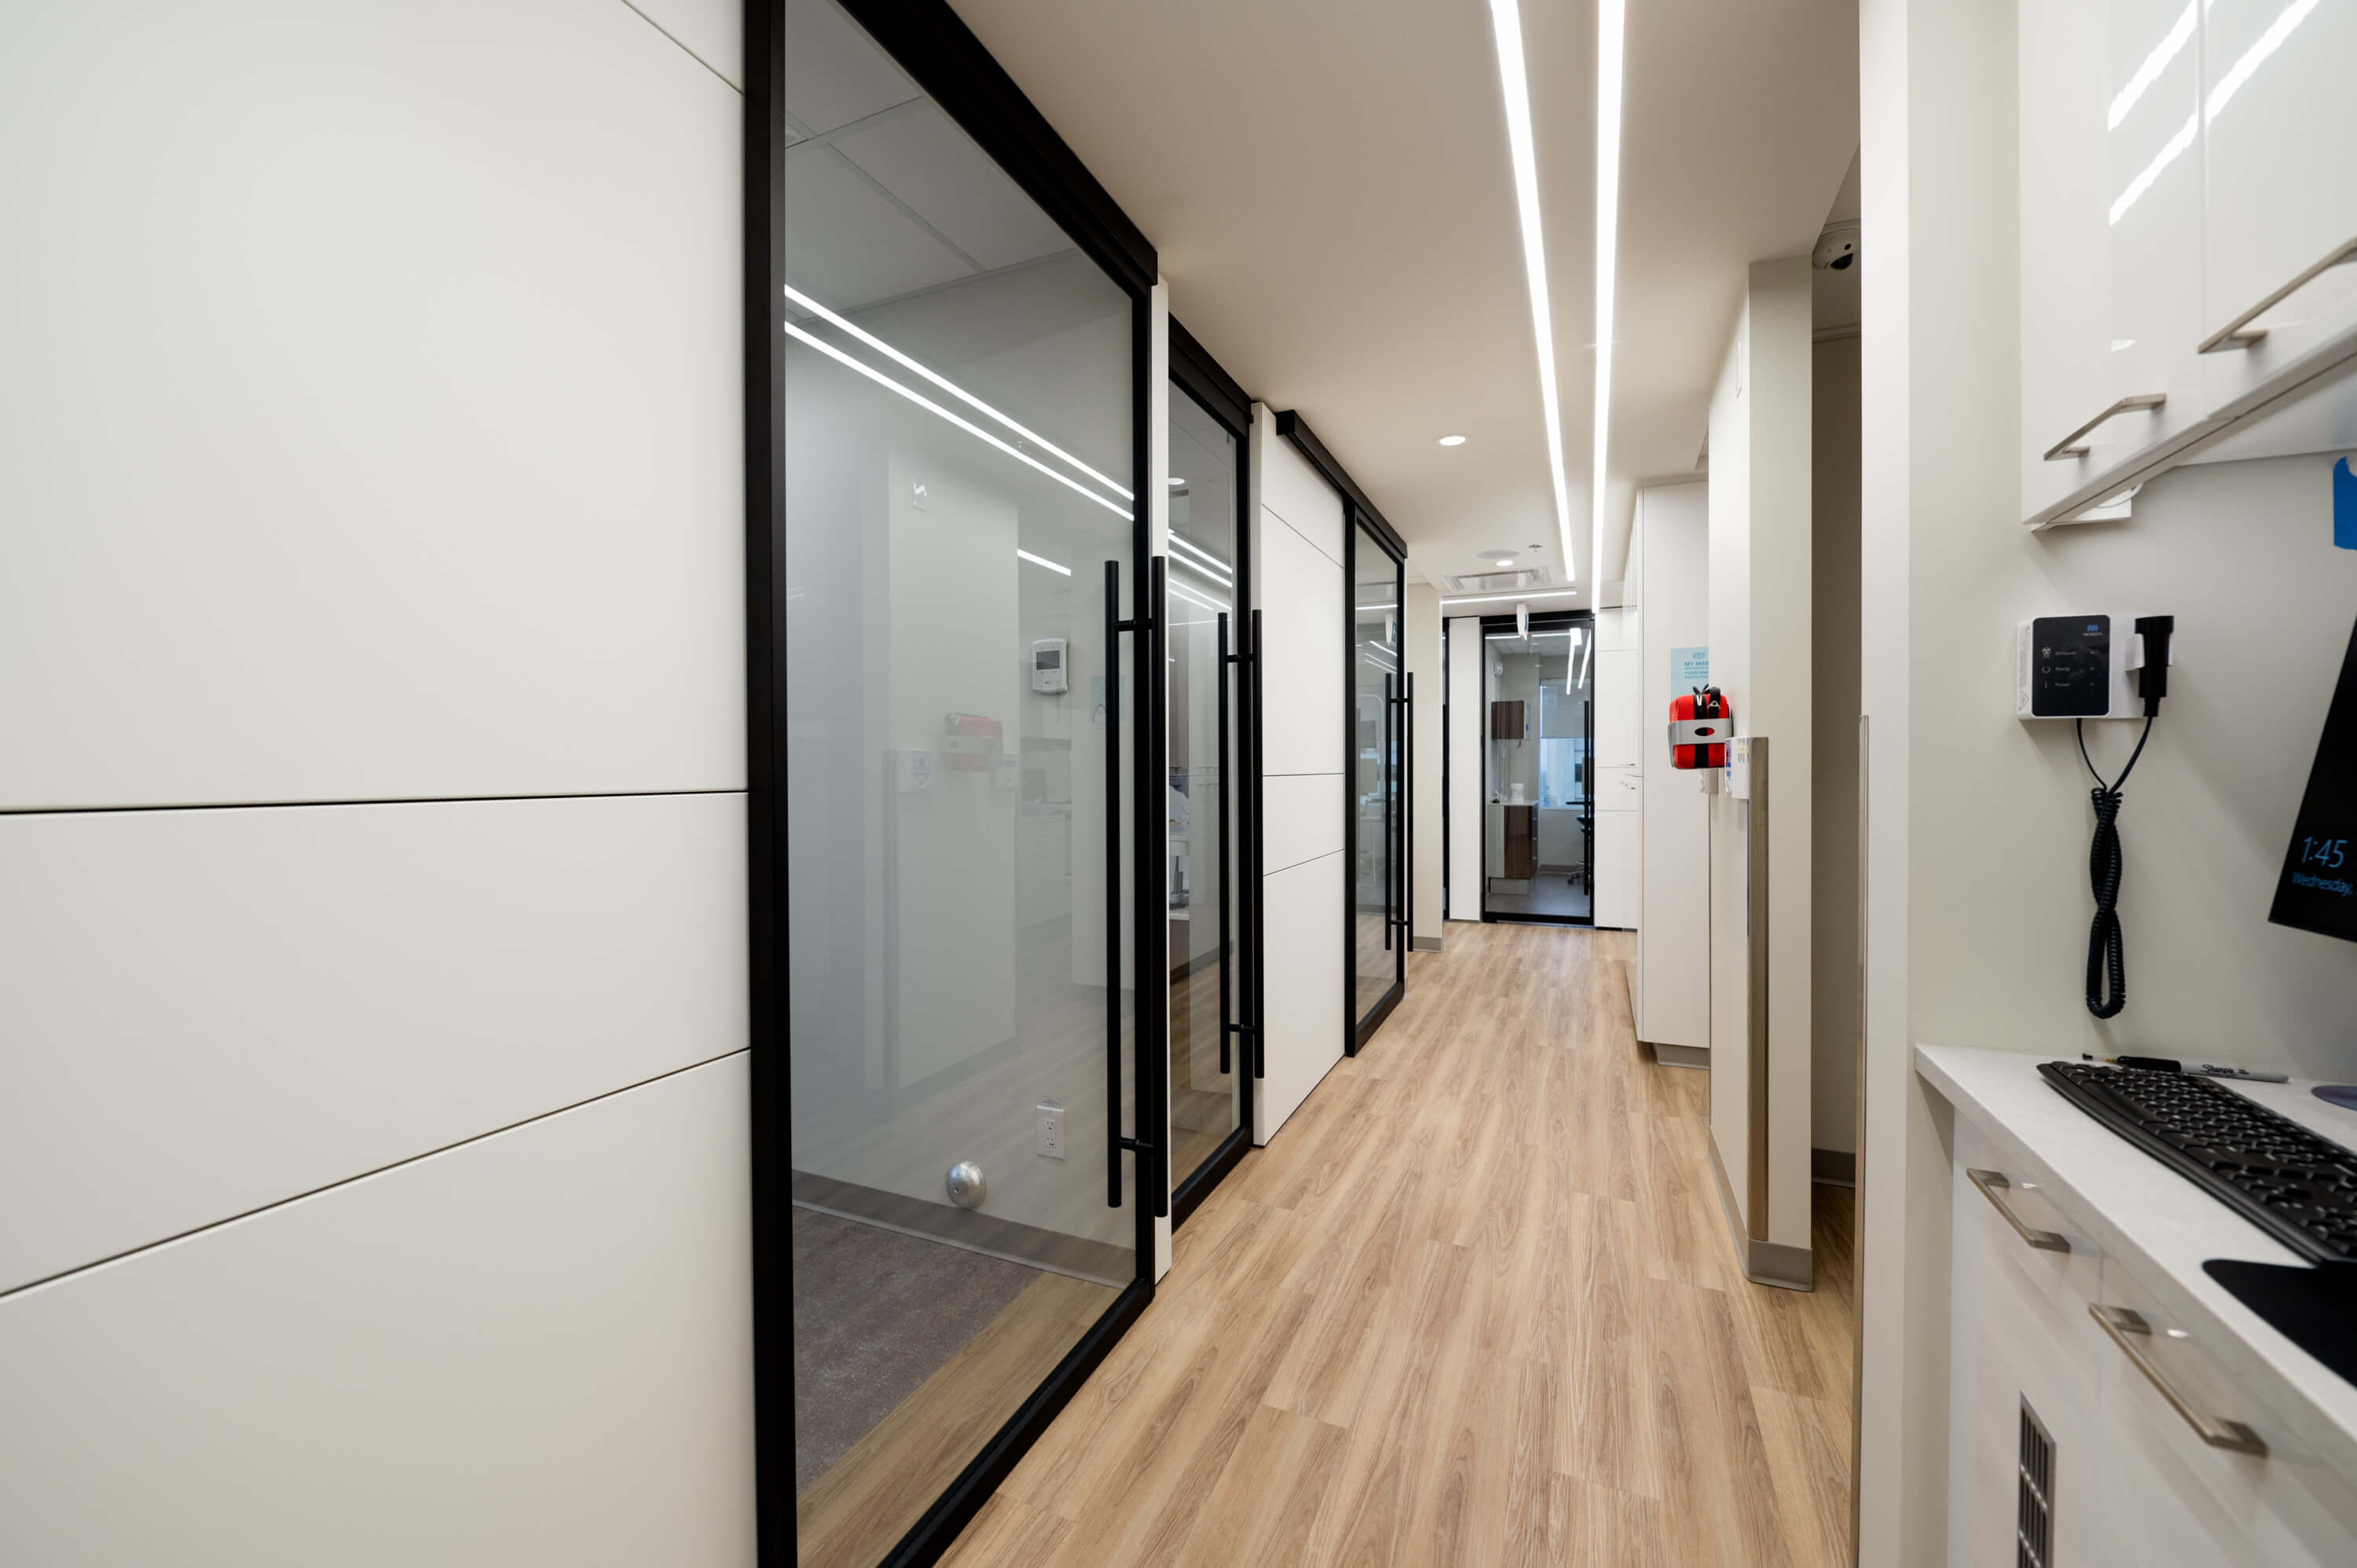 Falkbuilt healthcare project with solid and glass walls